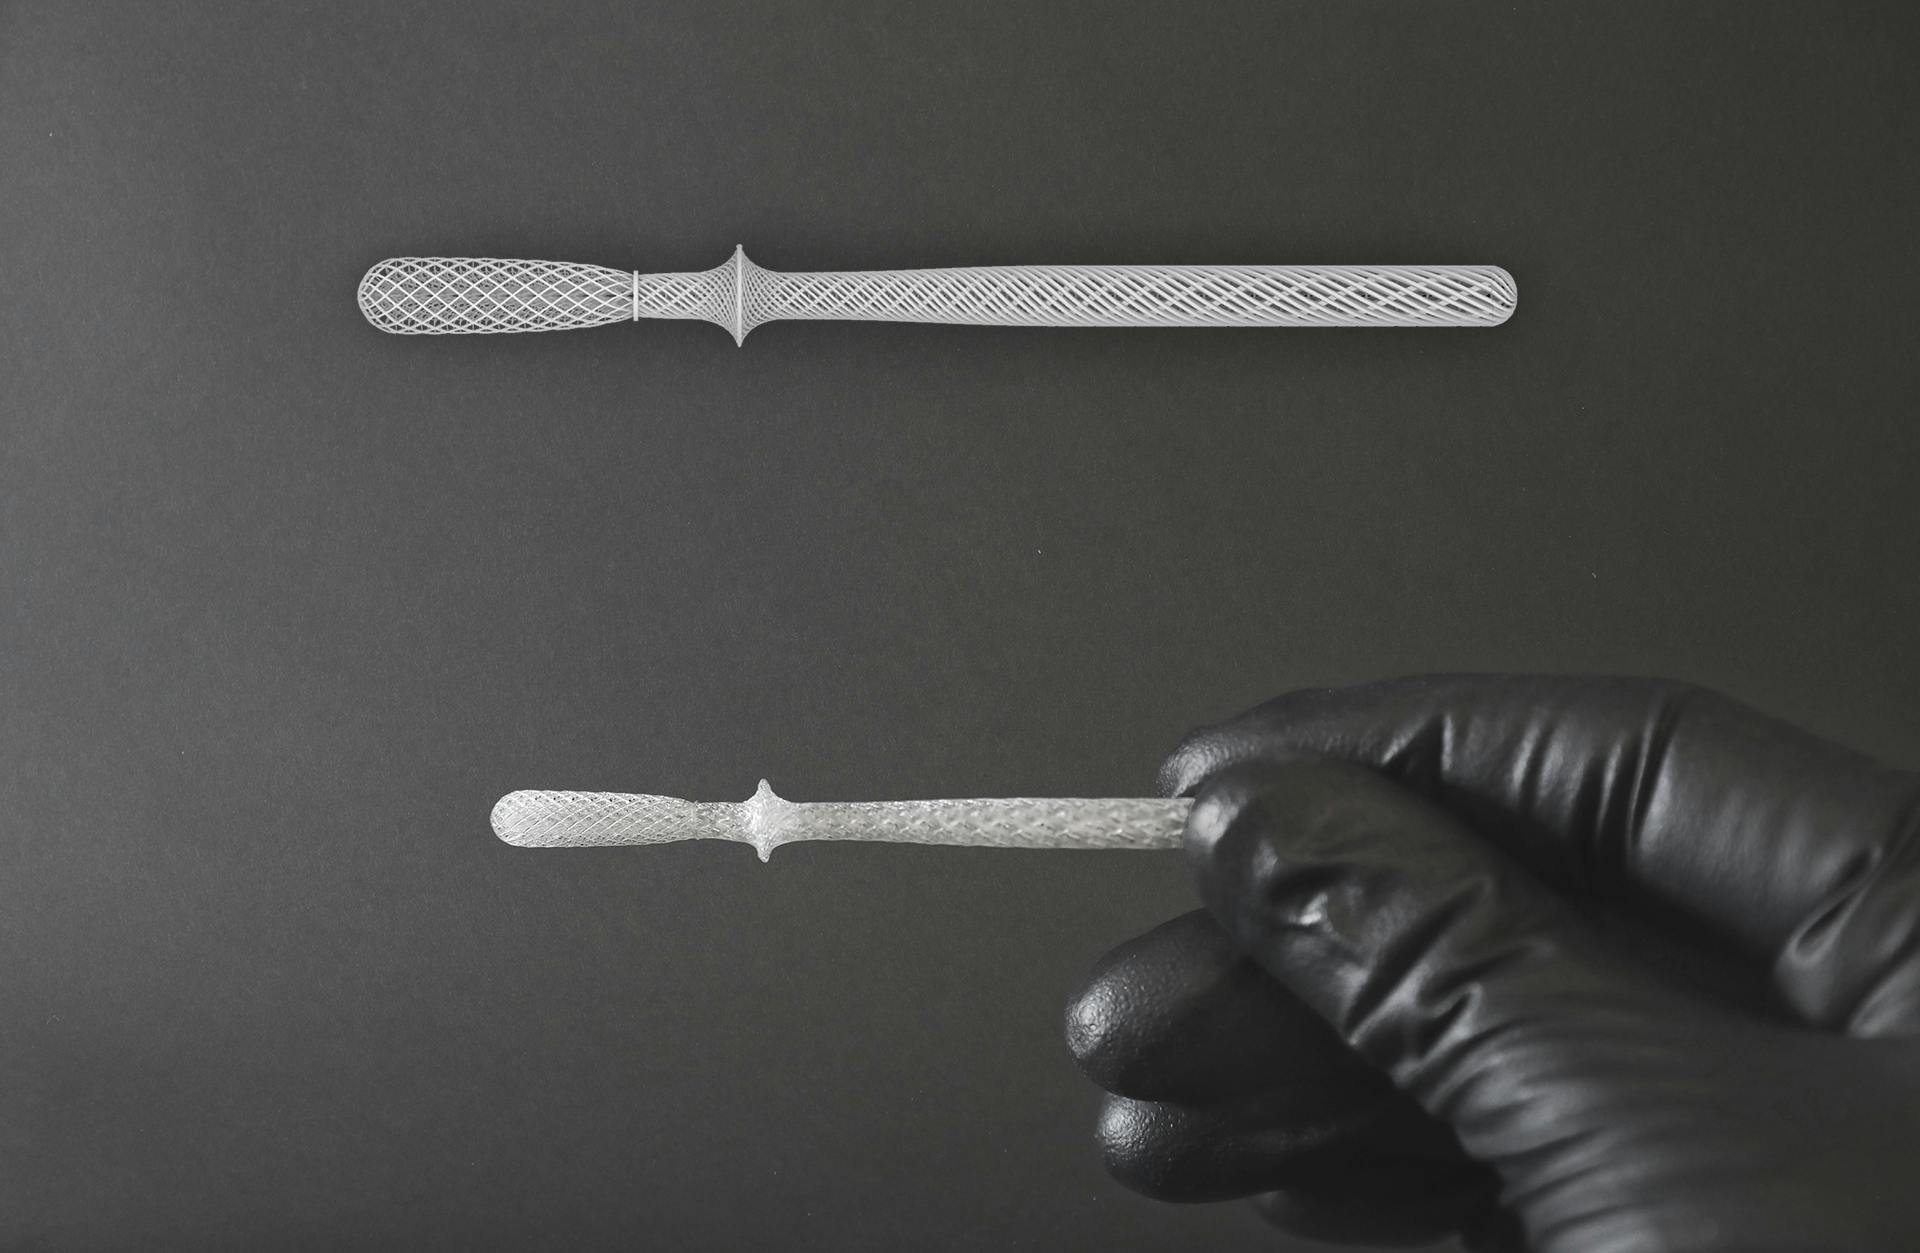 Real and digital swabs being compared